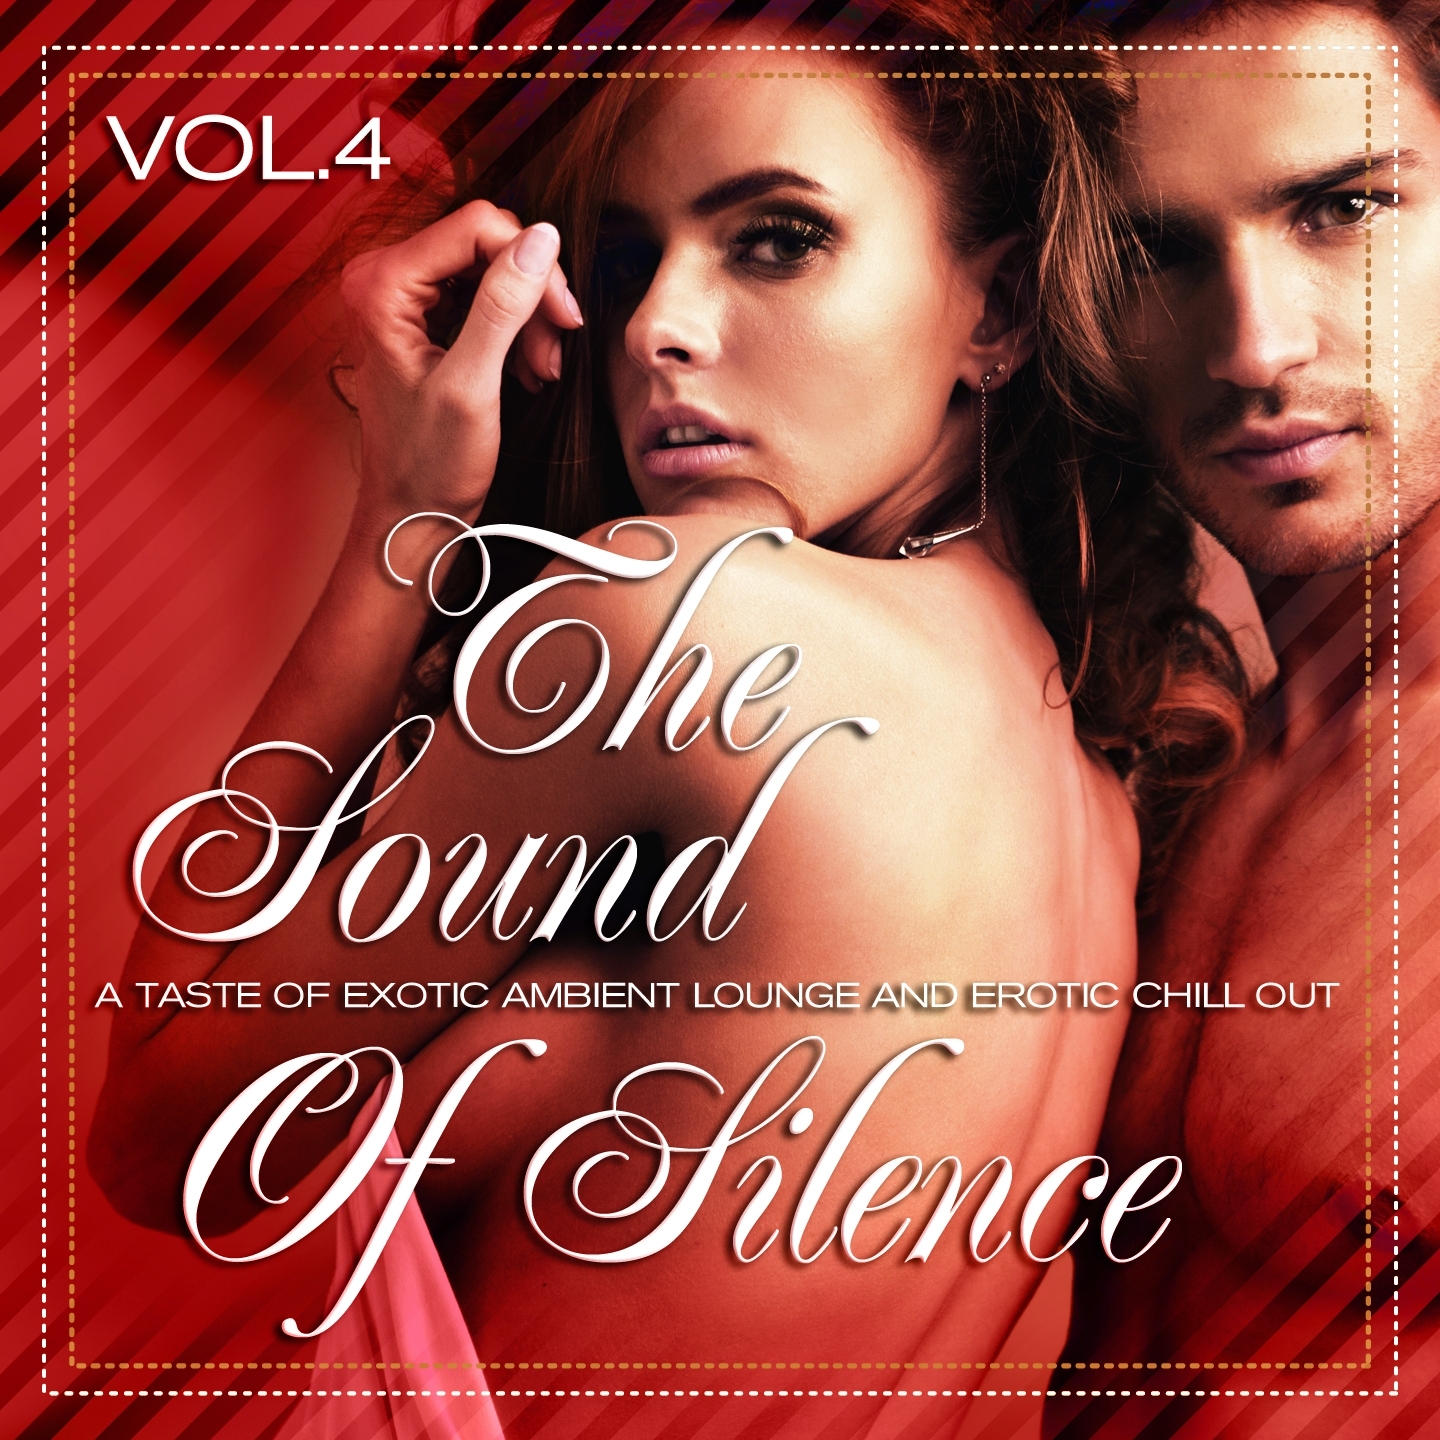 The Sound of Silence, Vol. 4 (A Taste of Exotic Ambient Lounge and Erotic Chill Out)